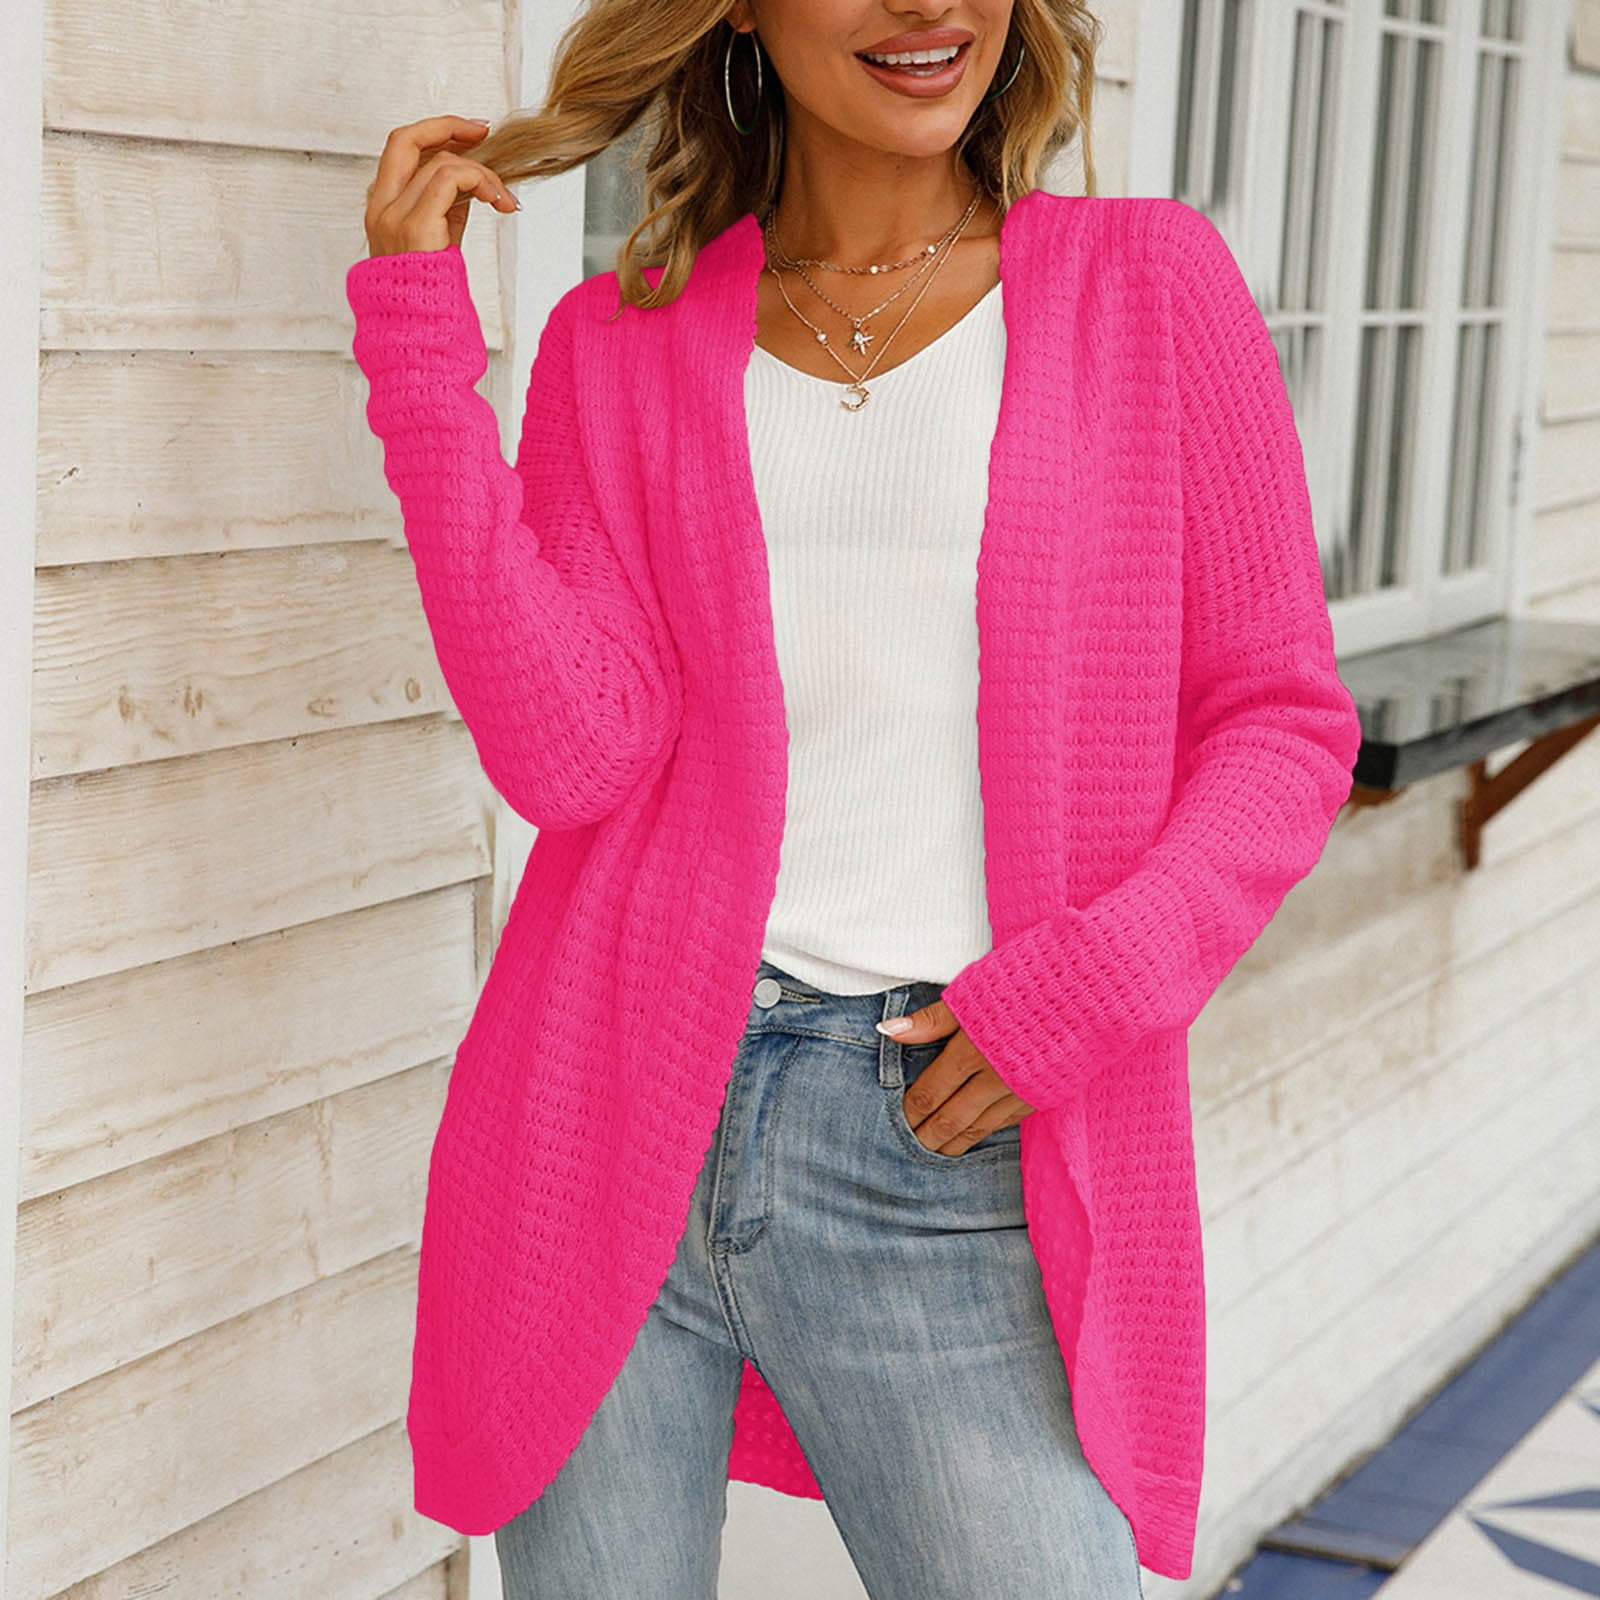 CAICJ98 Womens Tops Women's Open Front Hooded Cardigan Long Sleeve Casual  Knit Sweater Coat with Pockets Hot Pink,L 